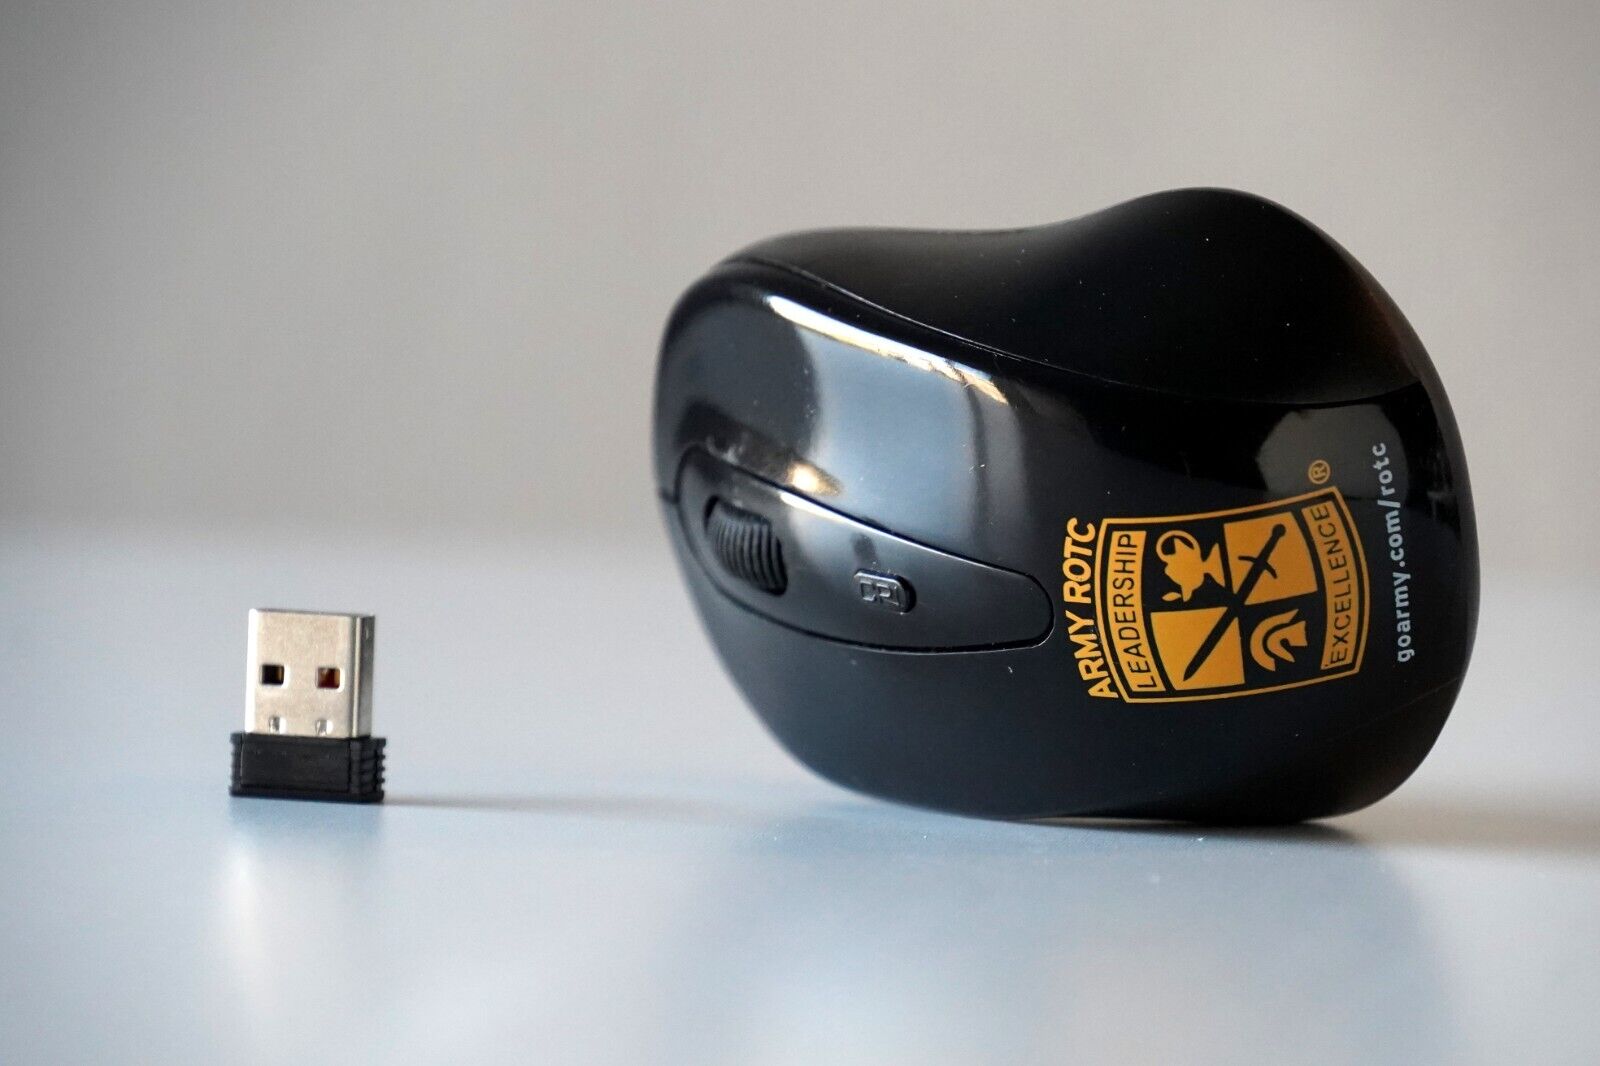 US ARMY ROTC - USB Wireless Optical Mouse 2.4 Ghz, Comes With Dongle